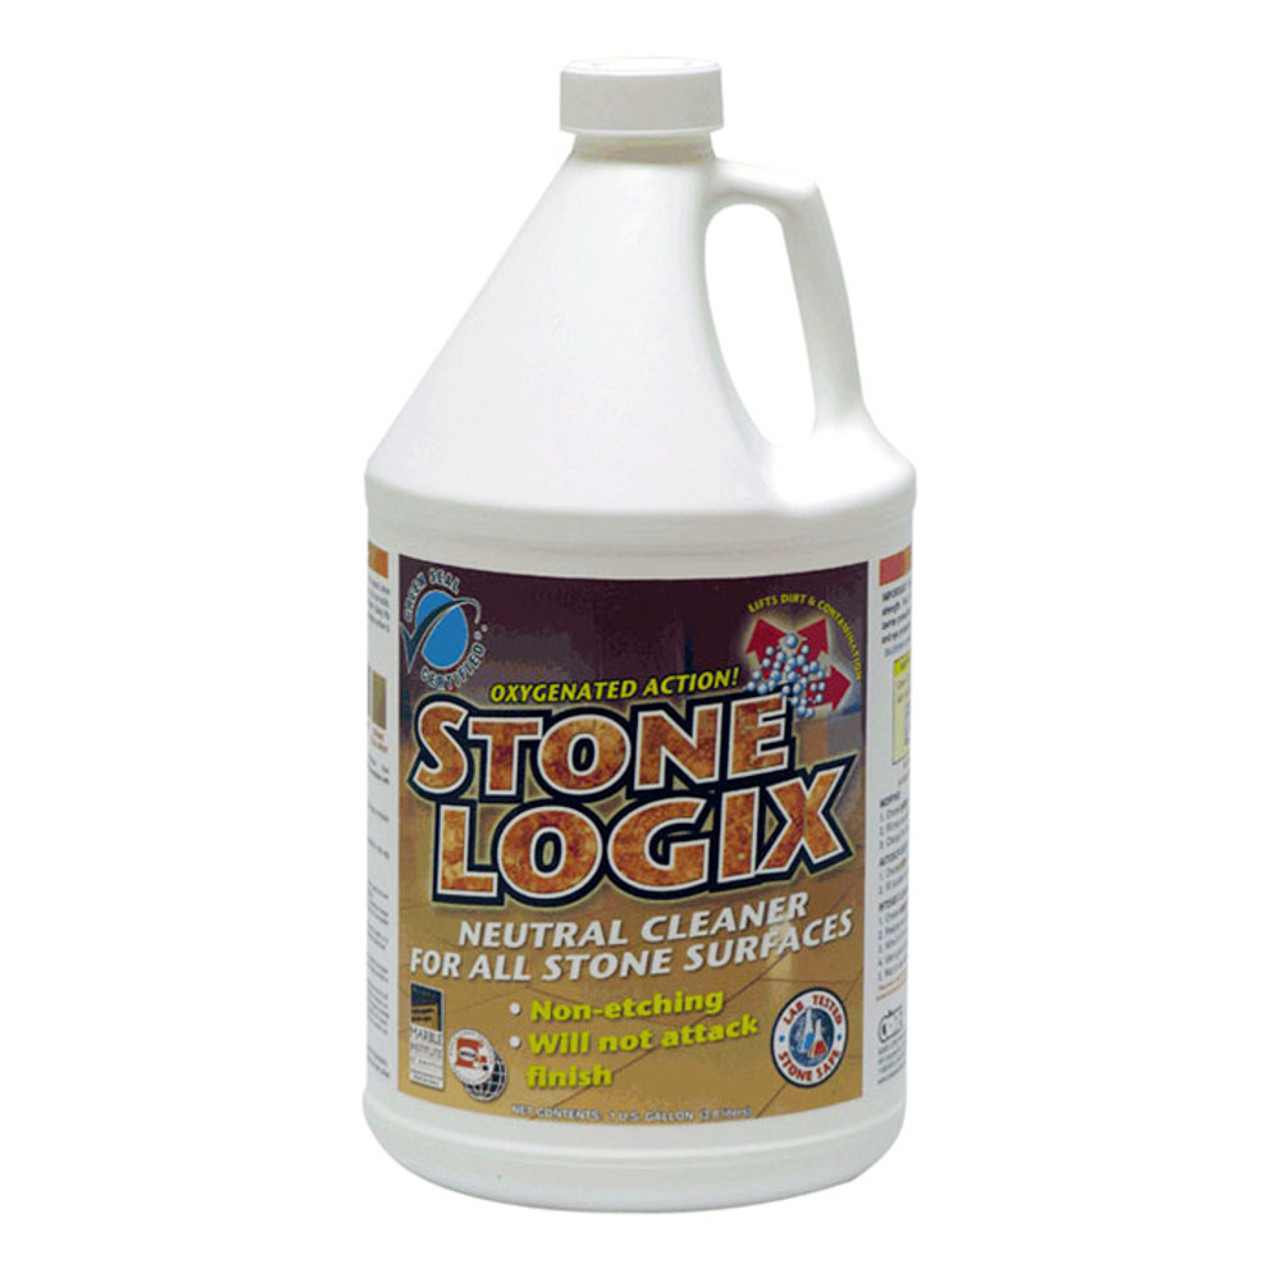 The non-etching formula in Stone Logix keeps stone beautiful for years to come.